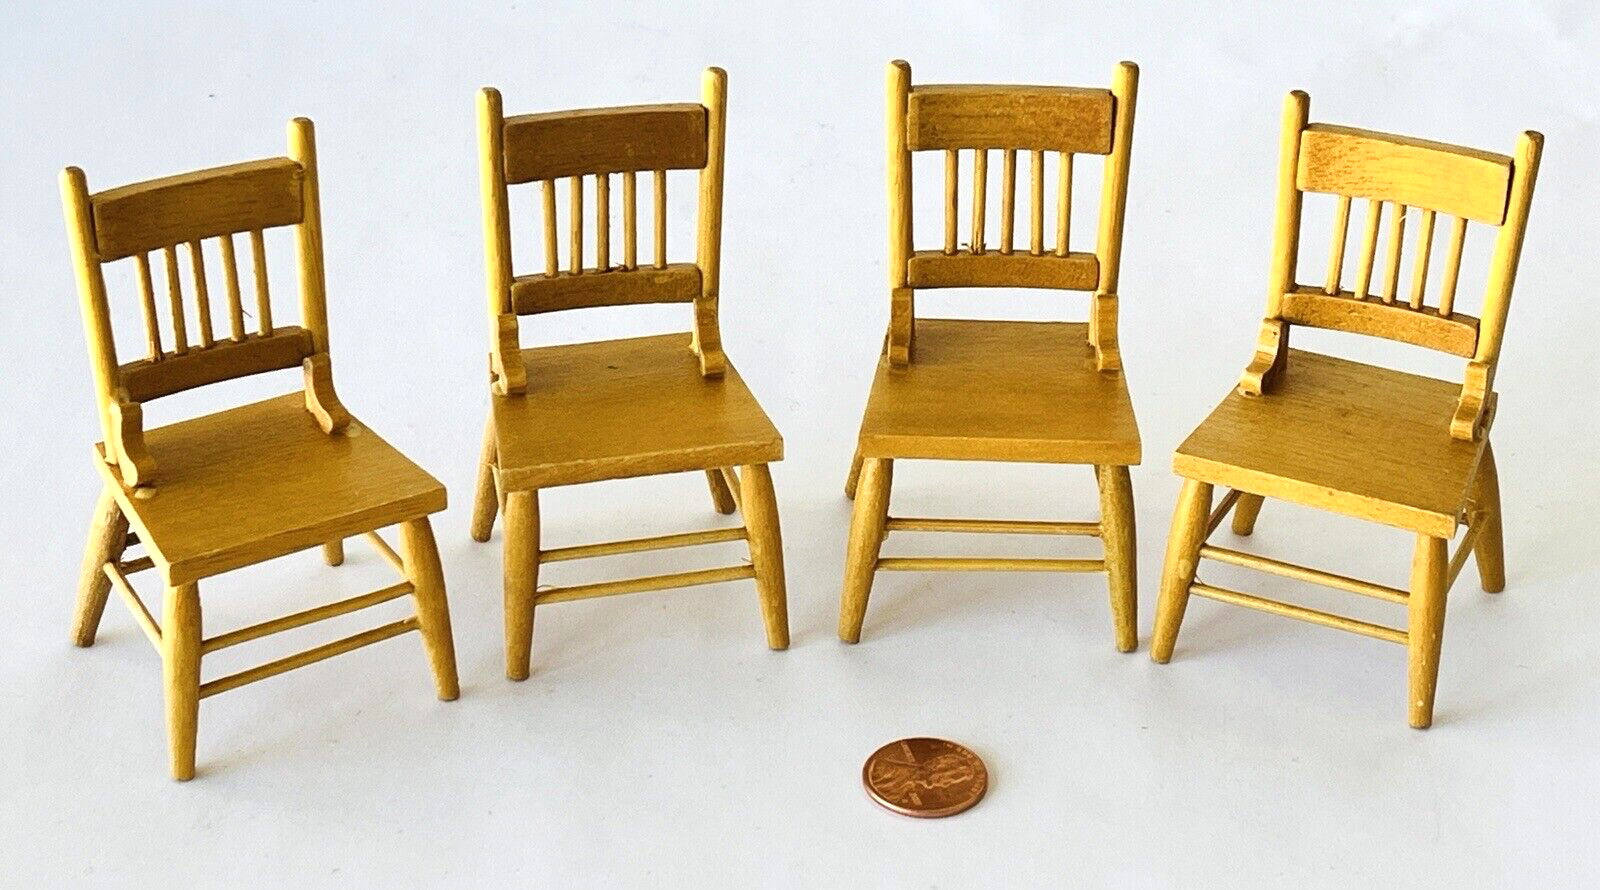 4 Dollhouse Miniature 1:12 Natural Wood Spindle Back Chairs 3....